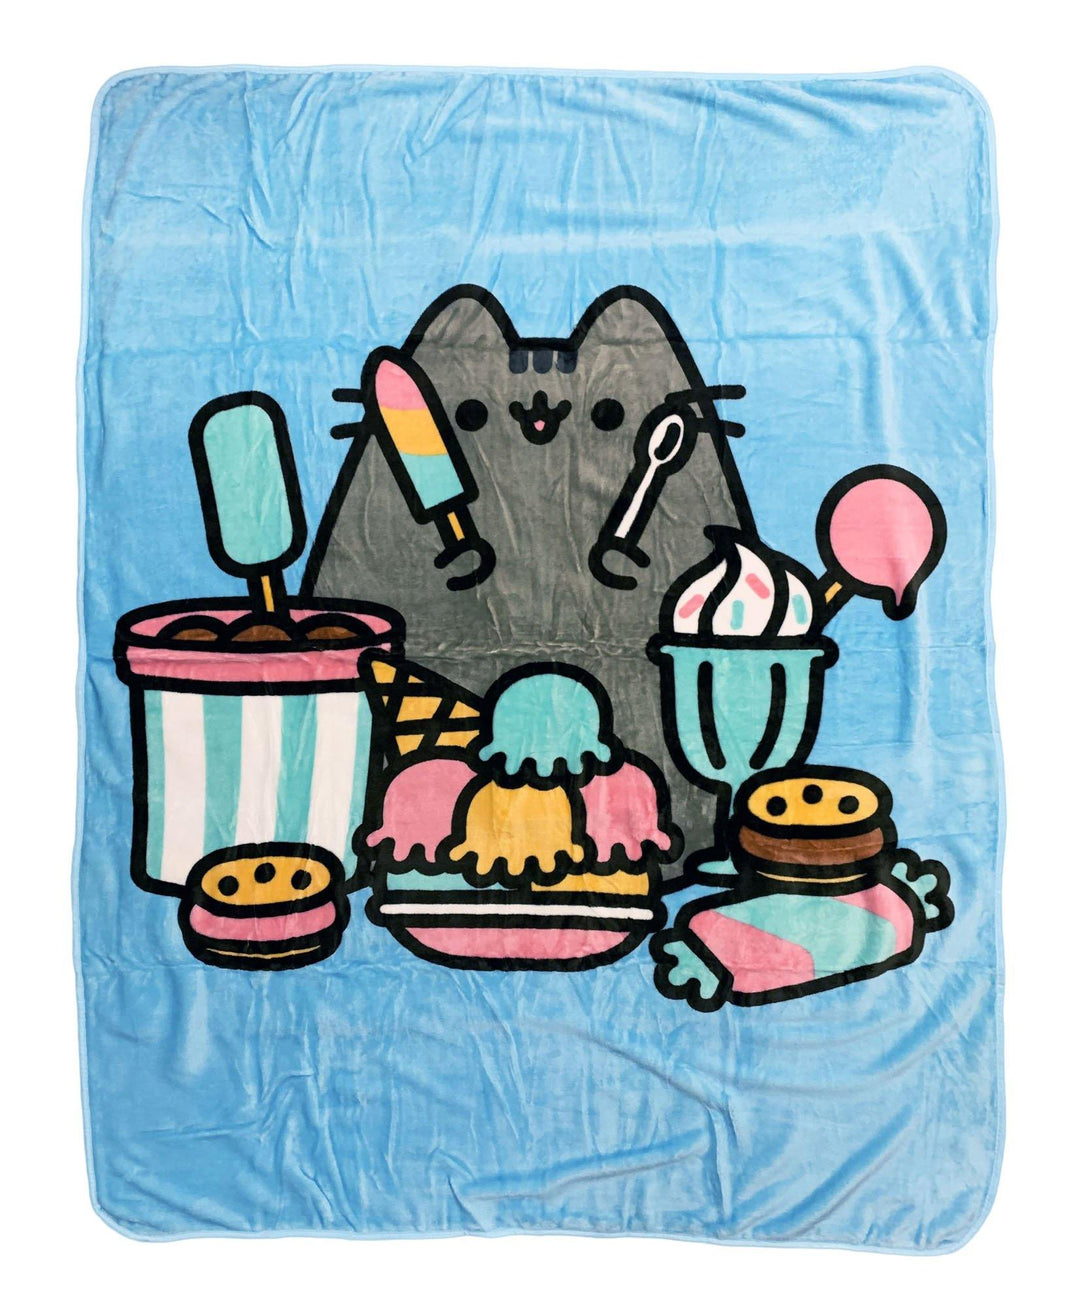 Pusheen With Ice Cream Foodie Super Soft Plush Throw Blanket 45in. By 60in.